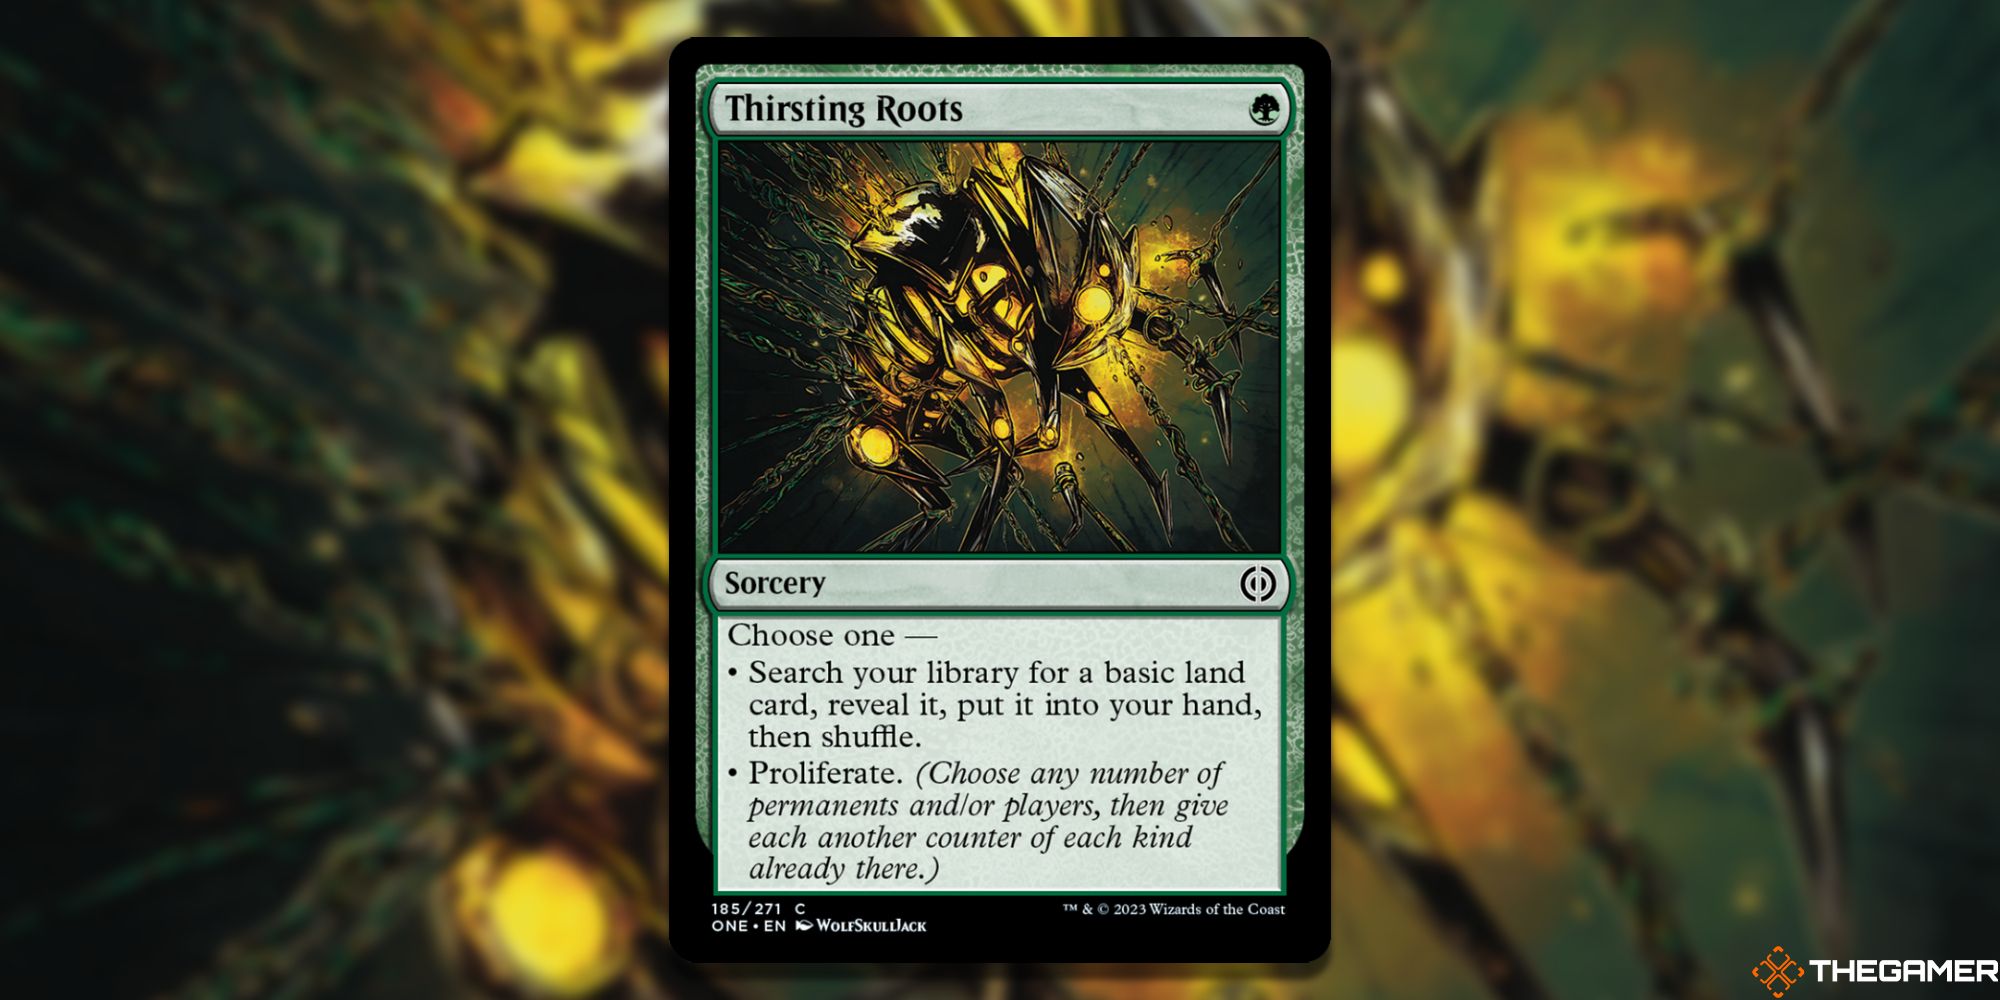 The card Thirsting Roots from Magic: The Gathering.